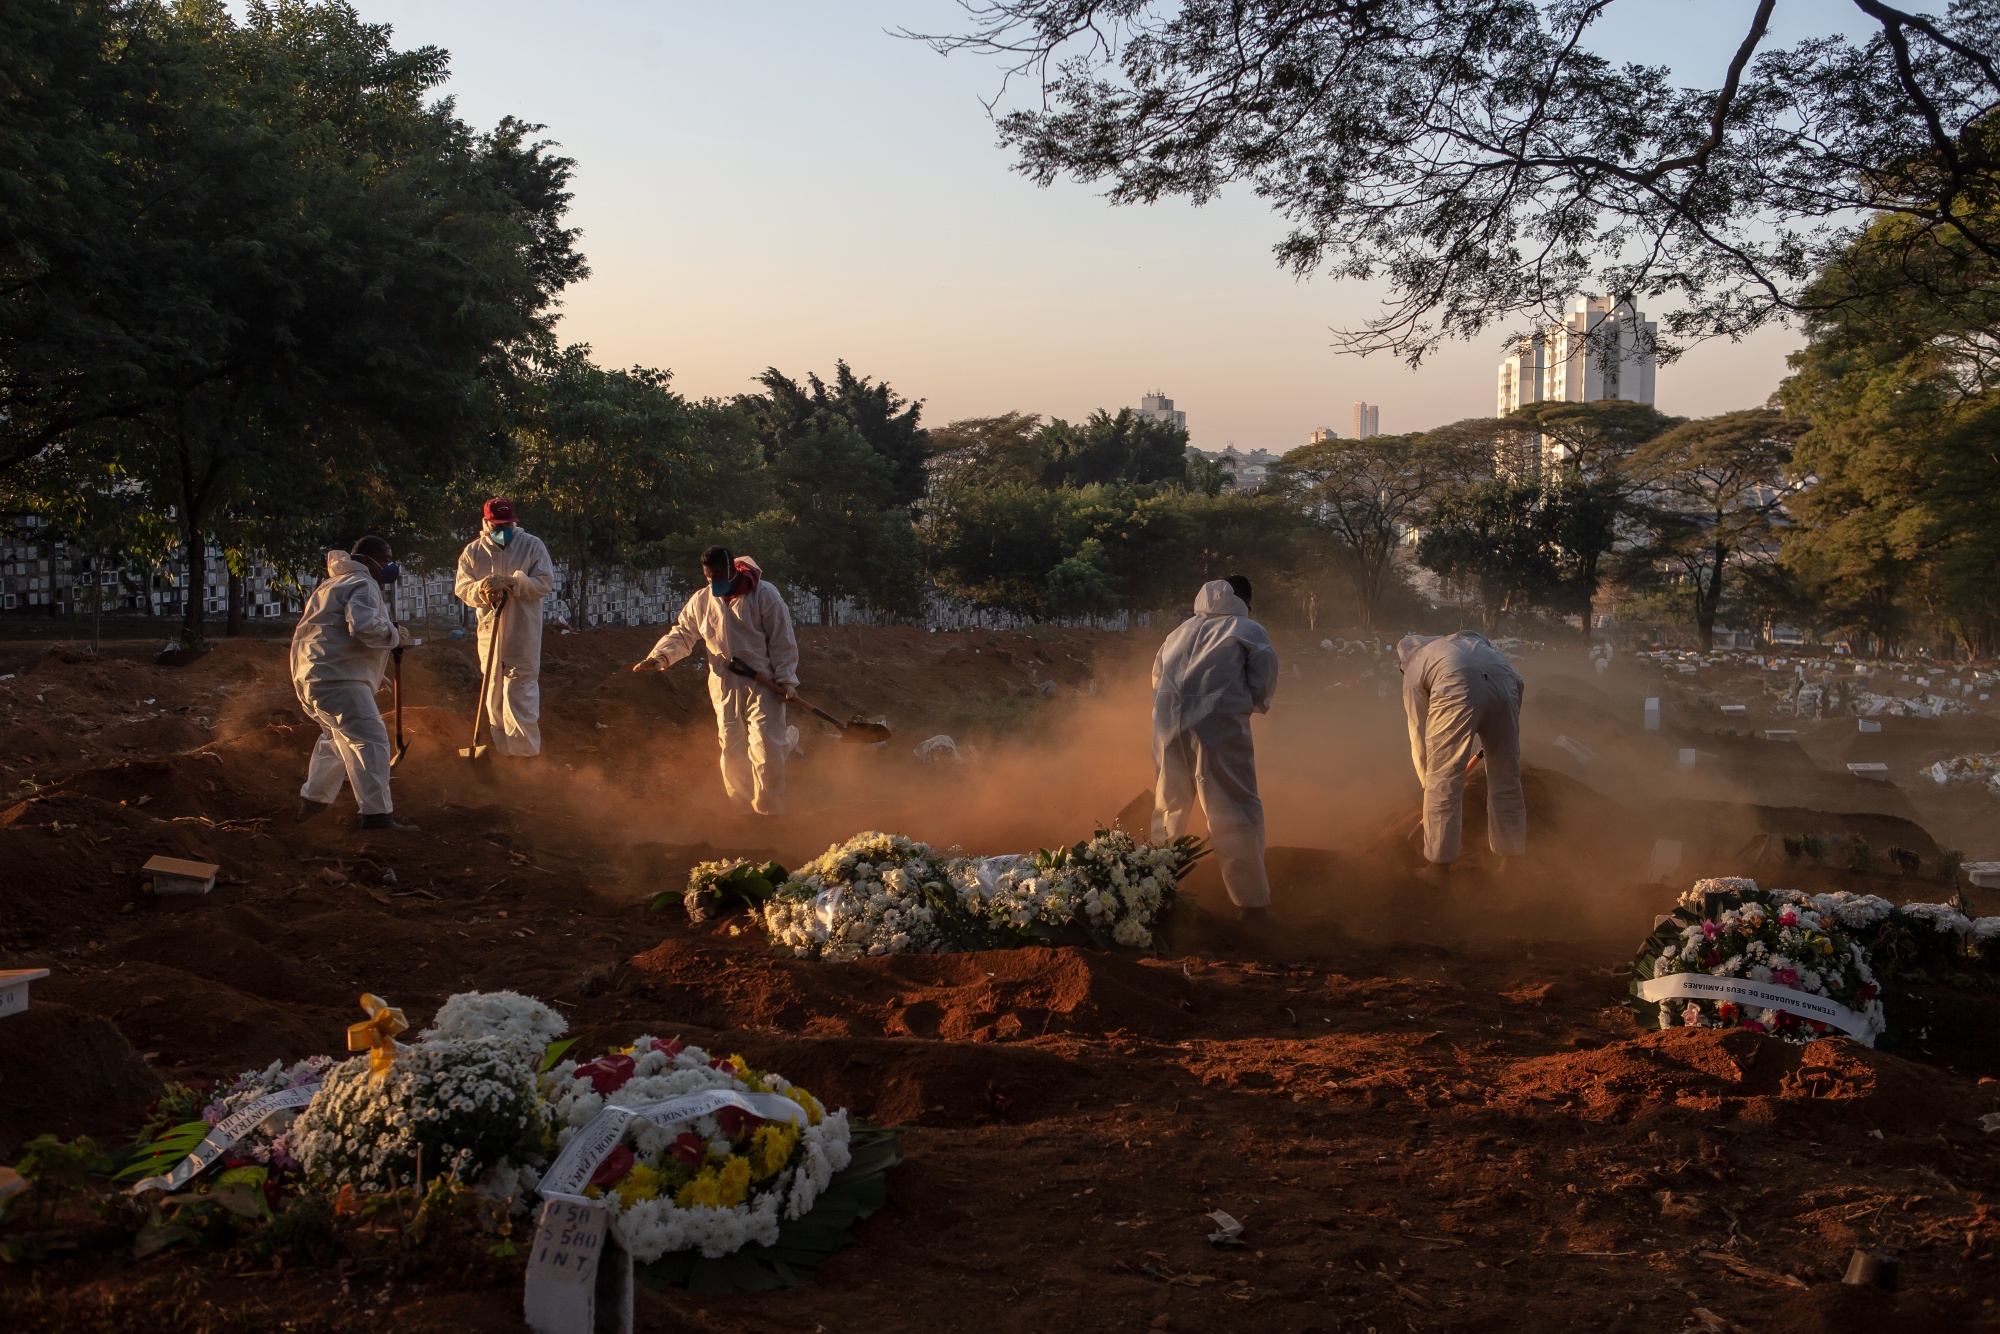 Workers wearing protective equipment bury the casket of a Covid-19 victim at the Vila Formosa cemetery in Sao Paulo.